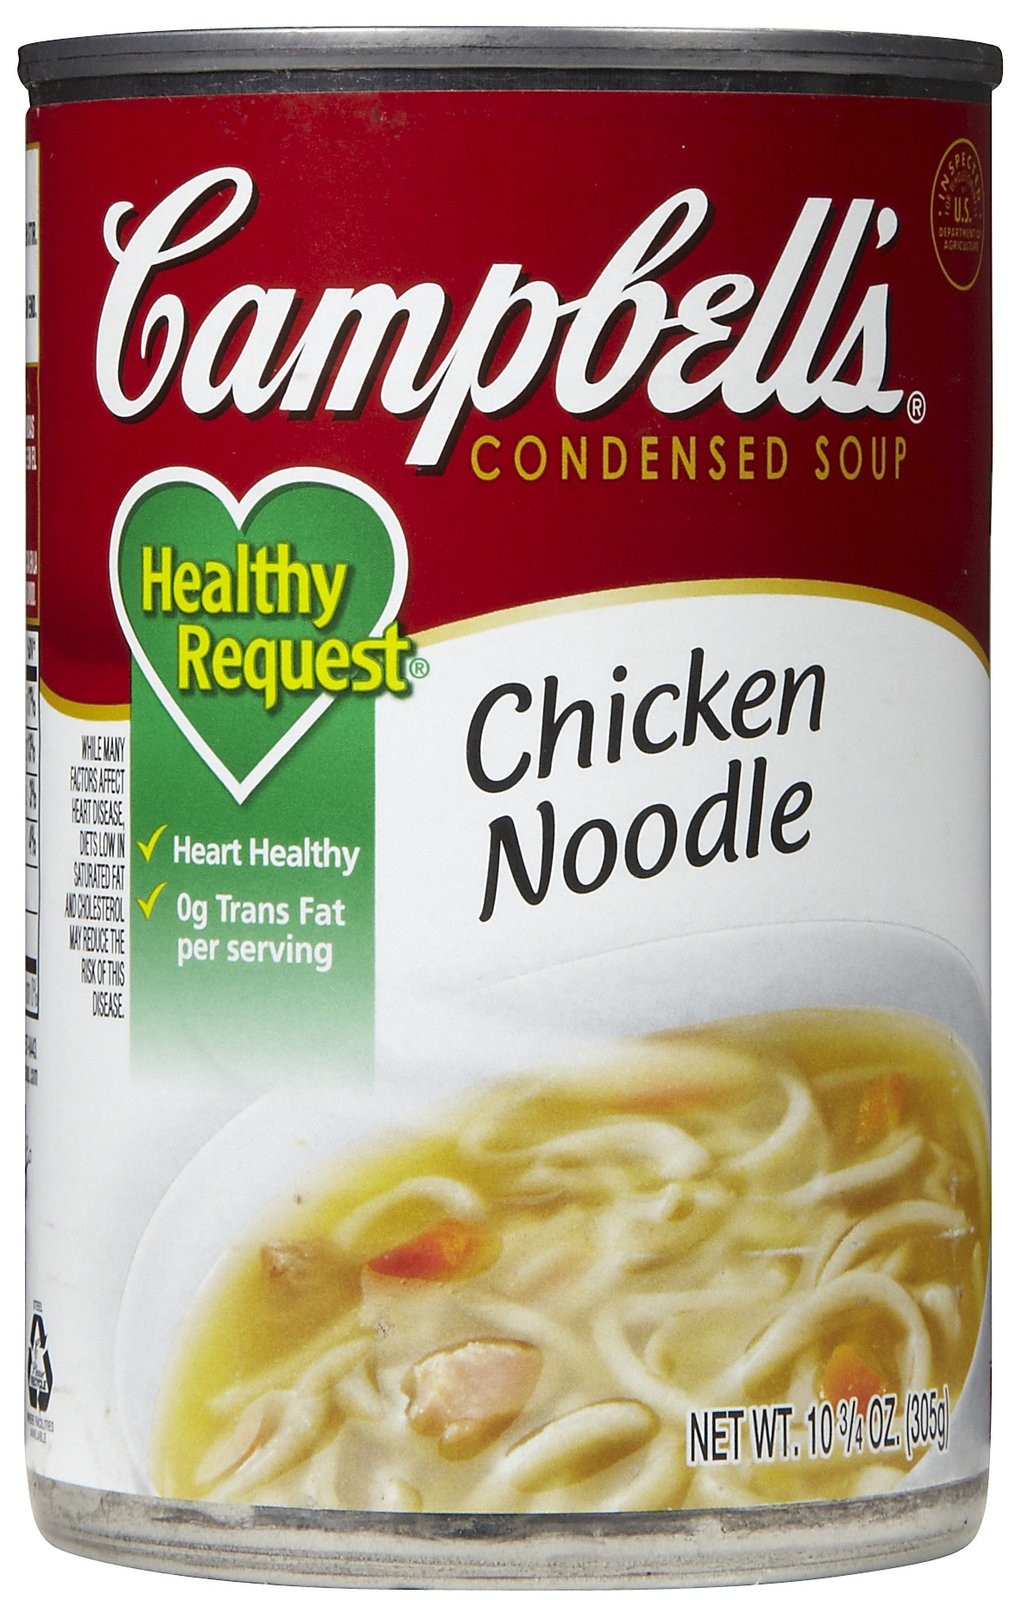 Campbell Chicken Noodle Soup
 Week Adjourned 8 16 13 Campbell s Soup LA Fitness